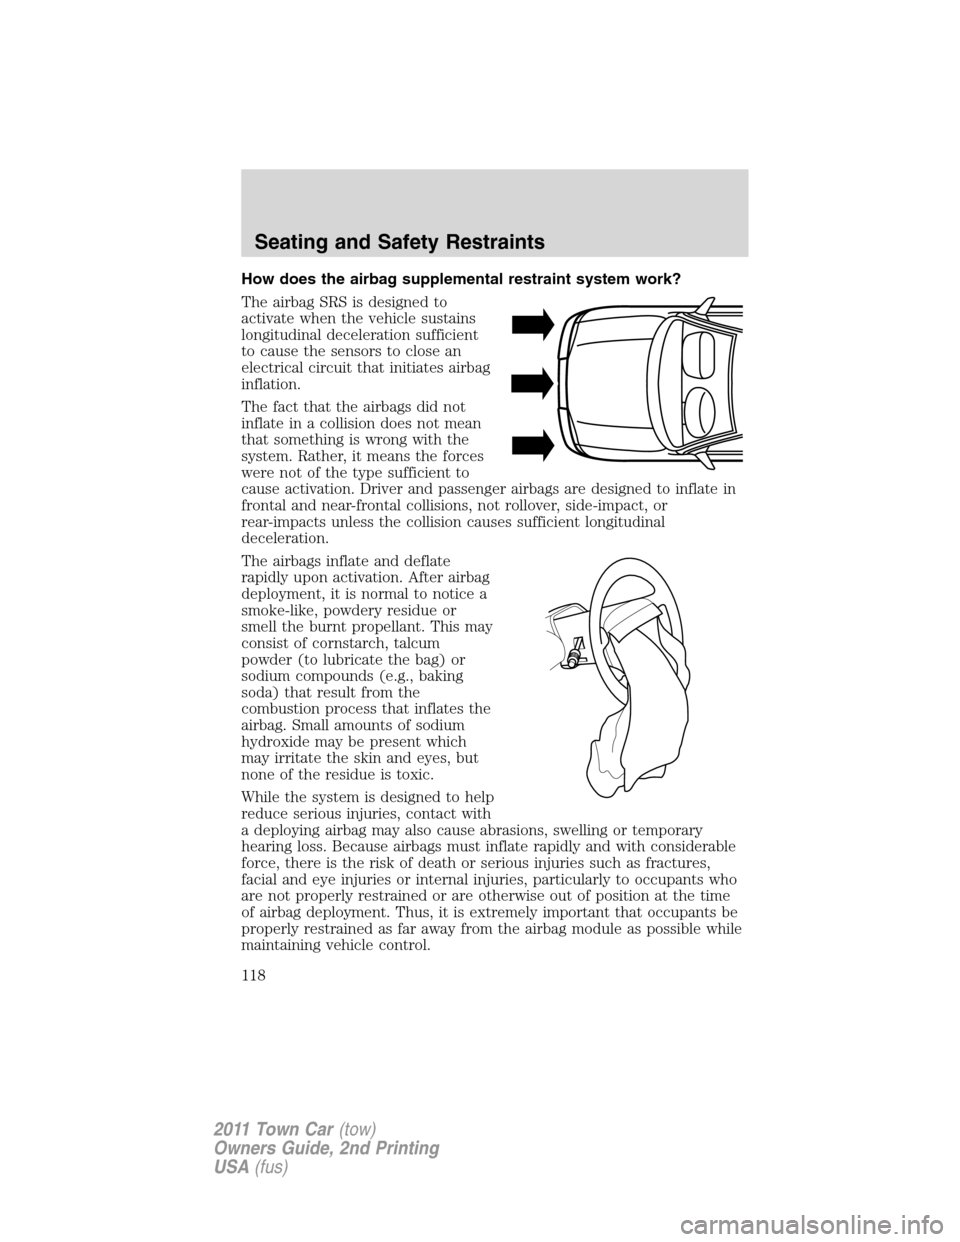 LINCOLN TOWN CAR 2011  Owners Manual How does the airbag supplemental restraint system work?
The airbag SRS is designed to
activate when the vehicle sustains
longitudinal deceleration sufficient
to cause the sensors to close an
electrica